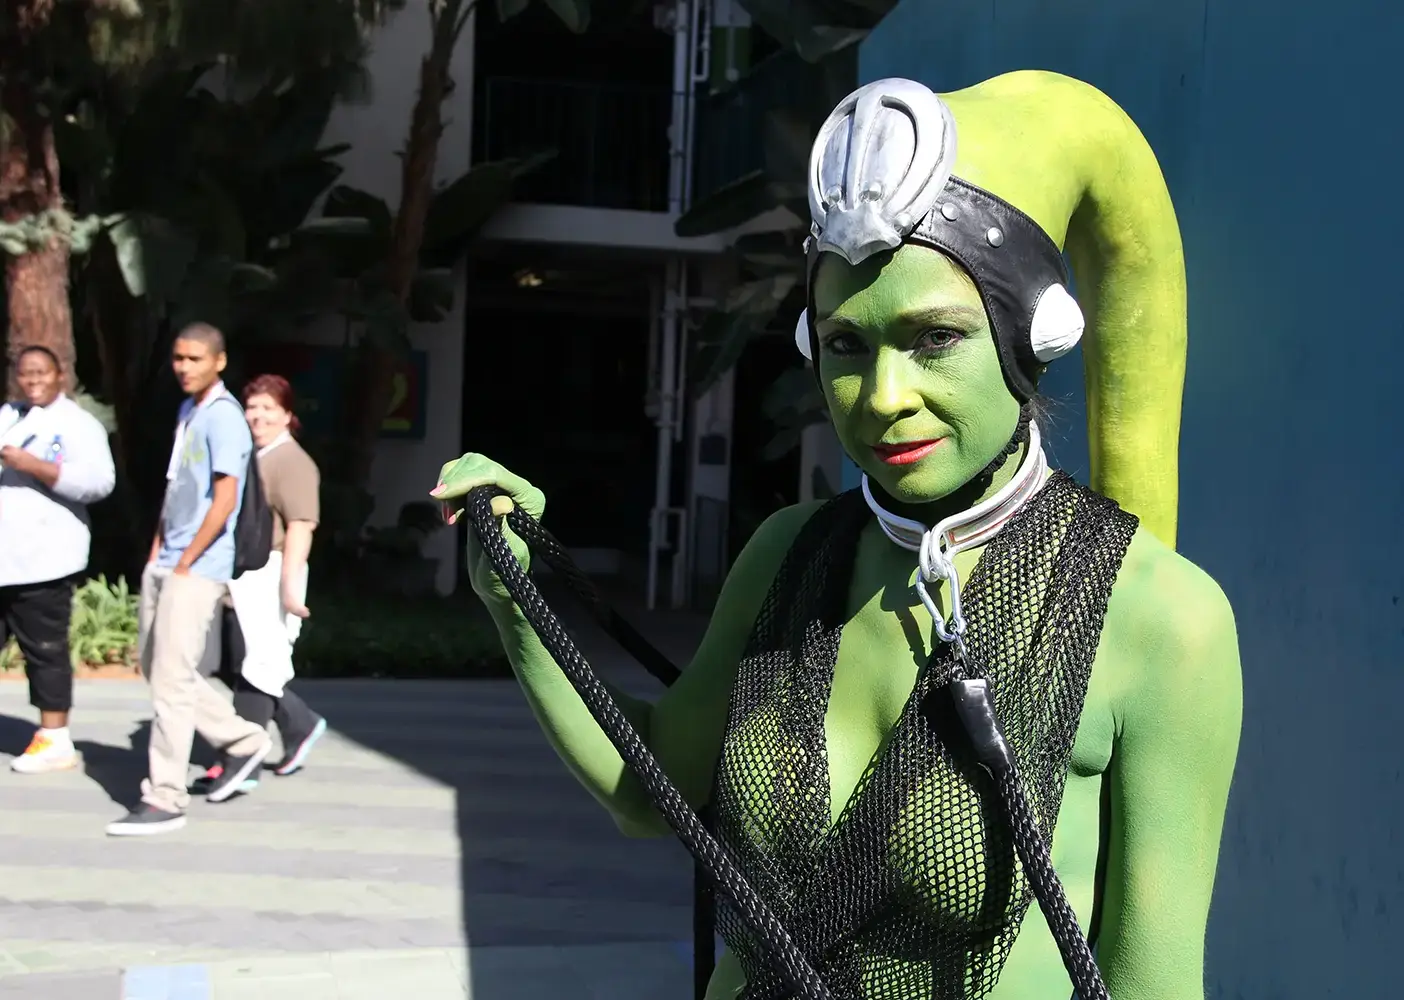 A women whose skin is painted green, wearing green prosthetics, a mesh dress, and a collar, leading her to look like the the Star Wars character Oola.